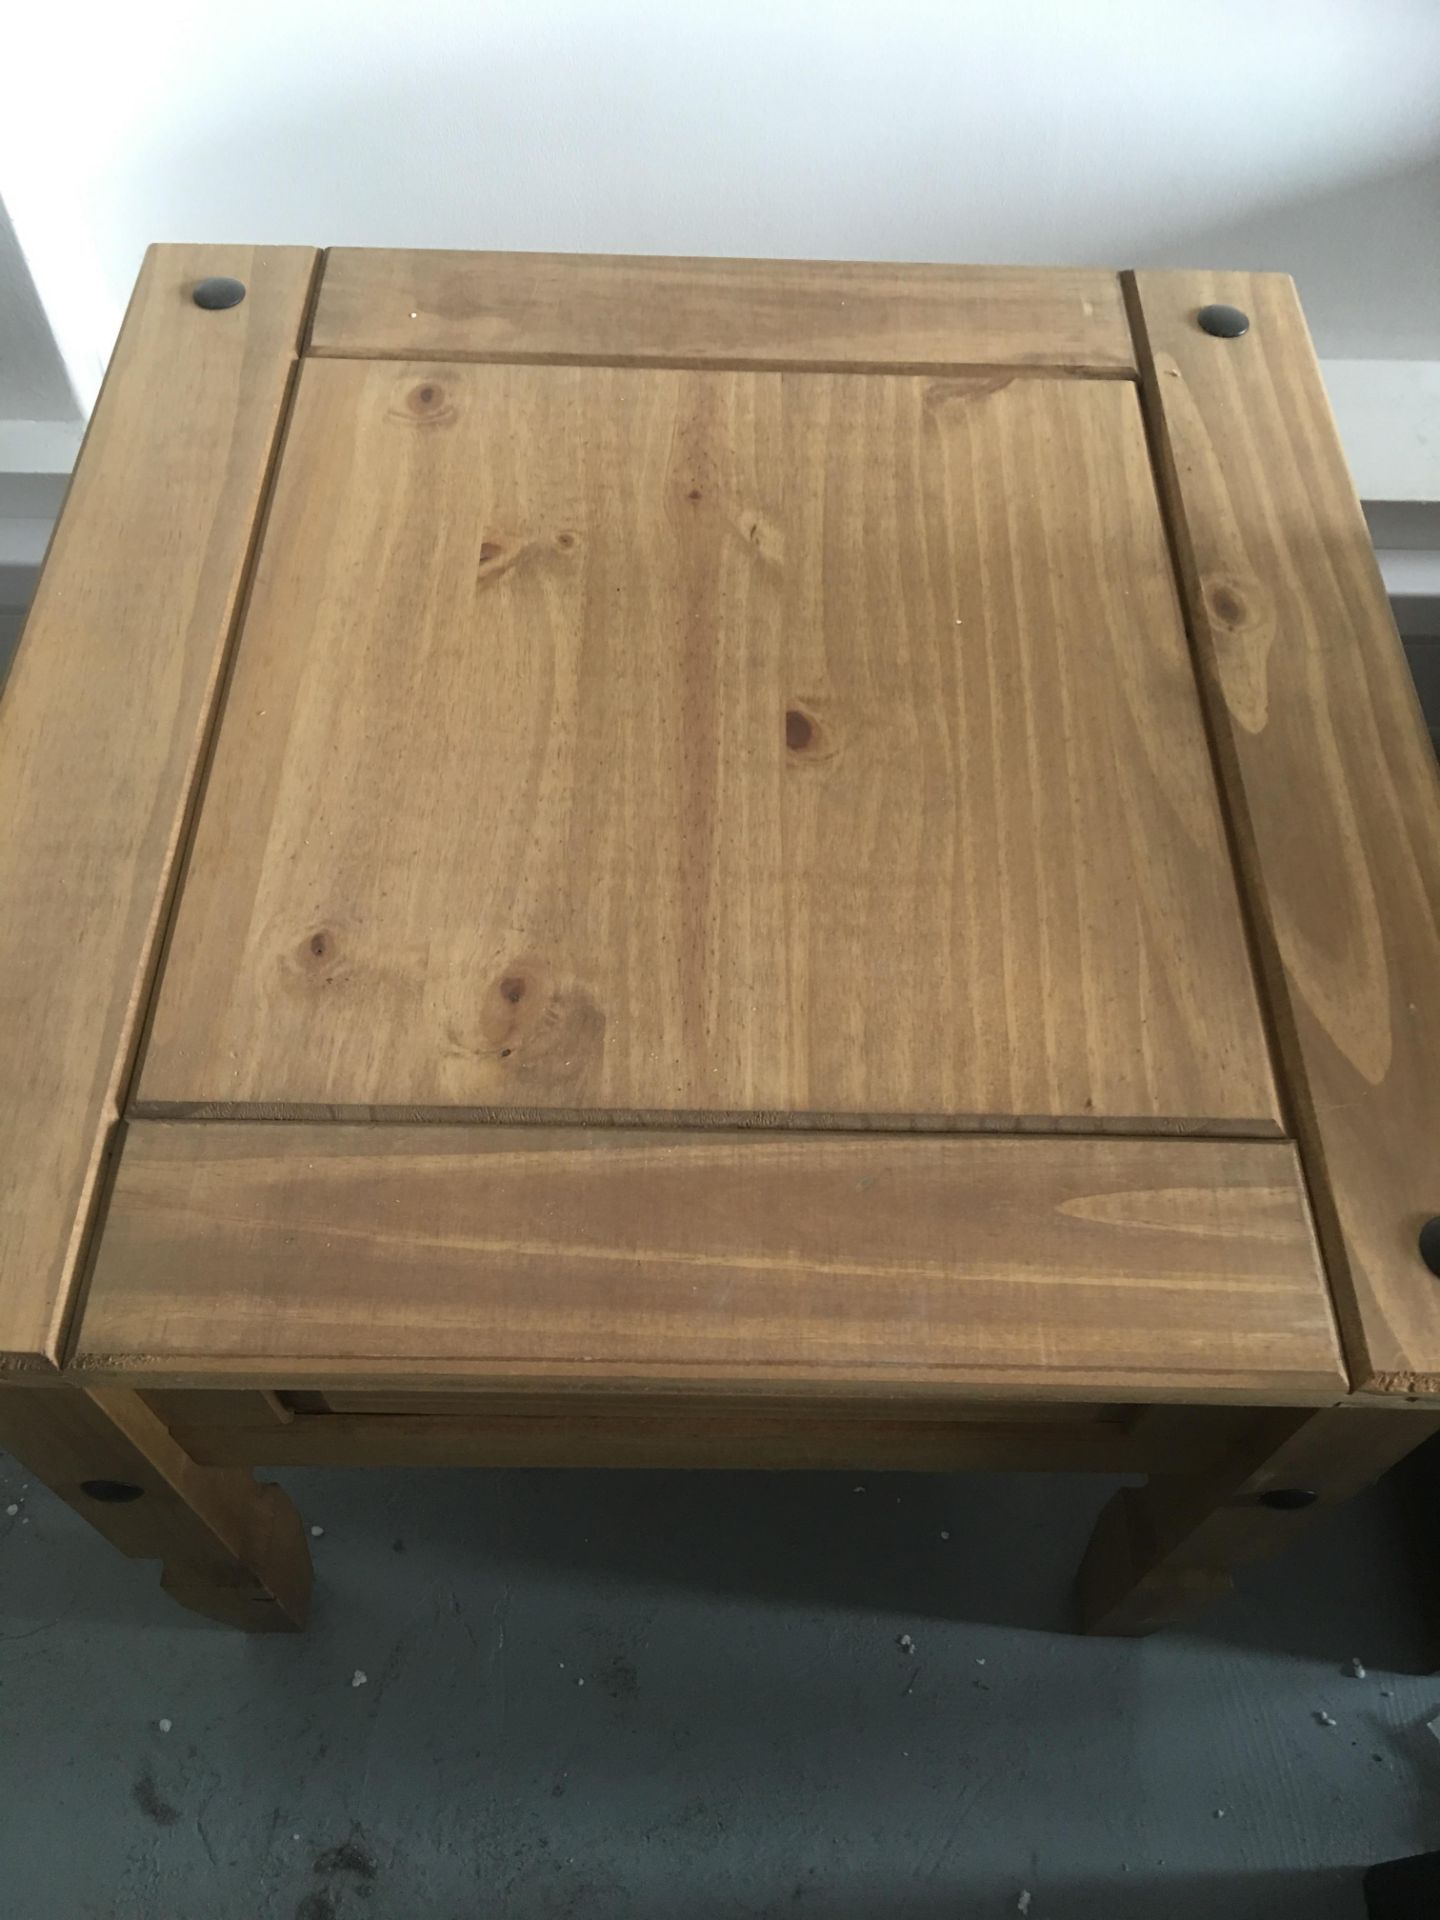 Wooden Coffee Table - Image 2 of 2